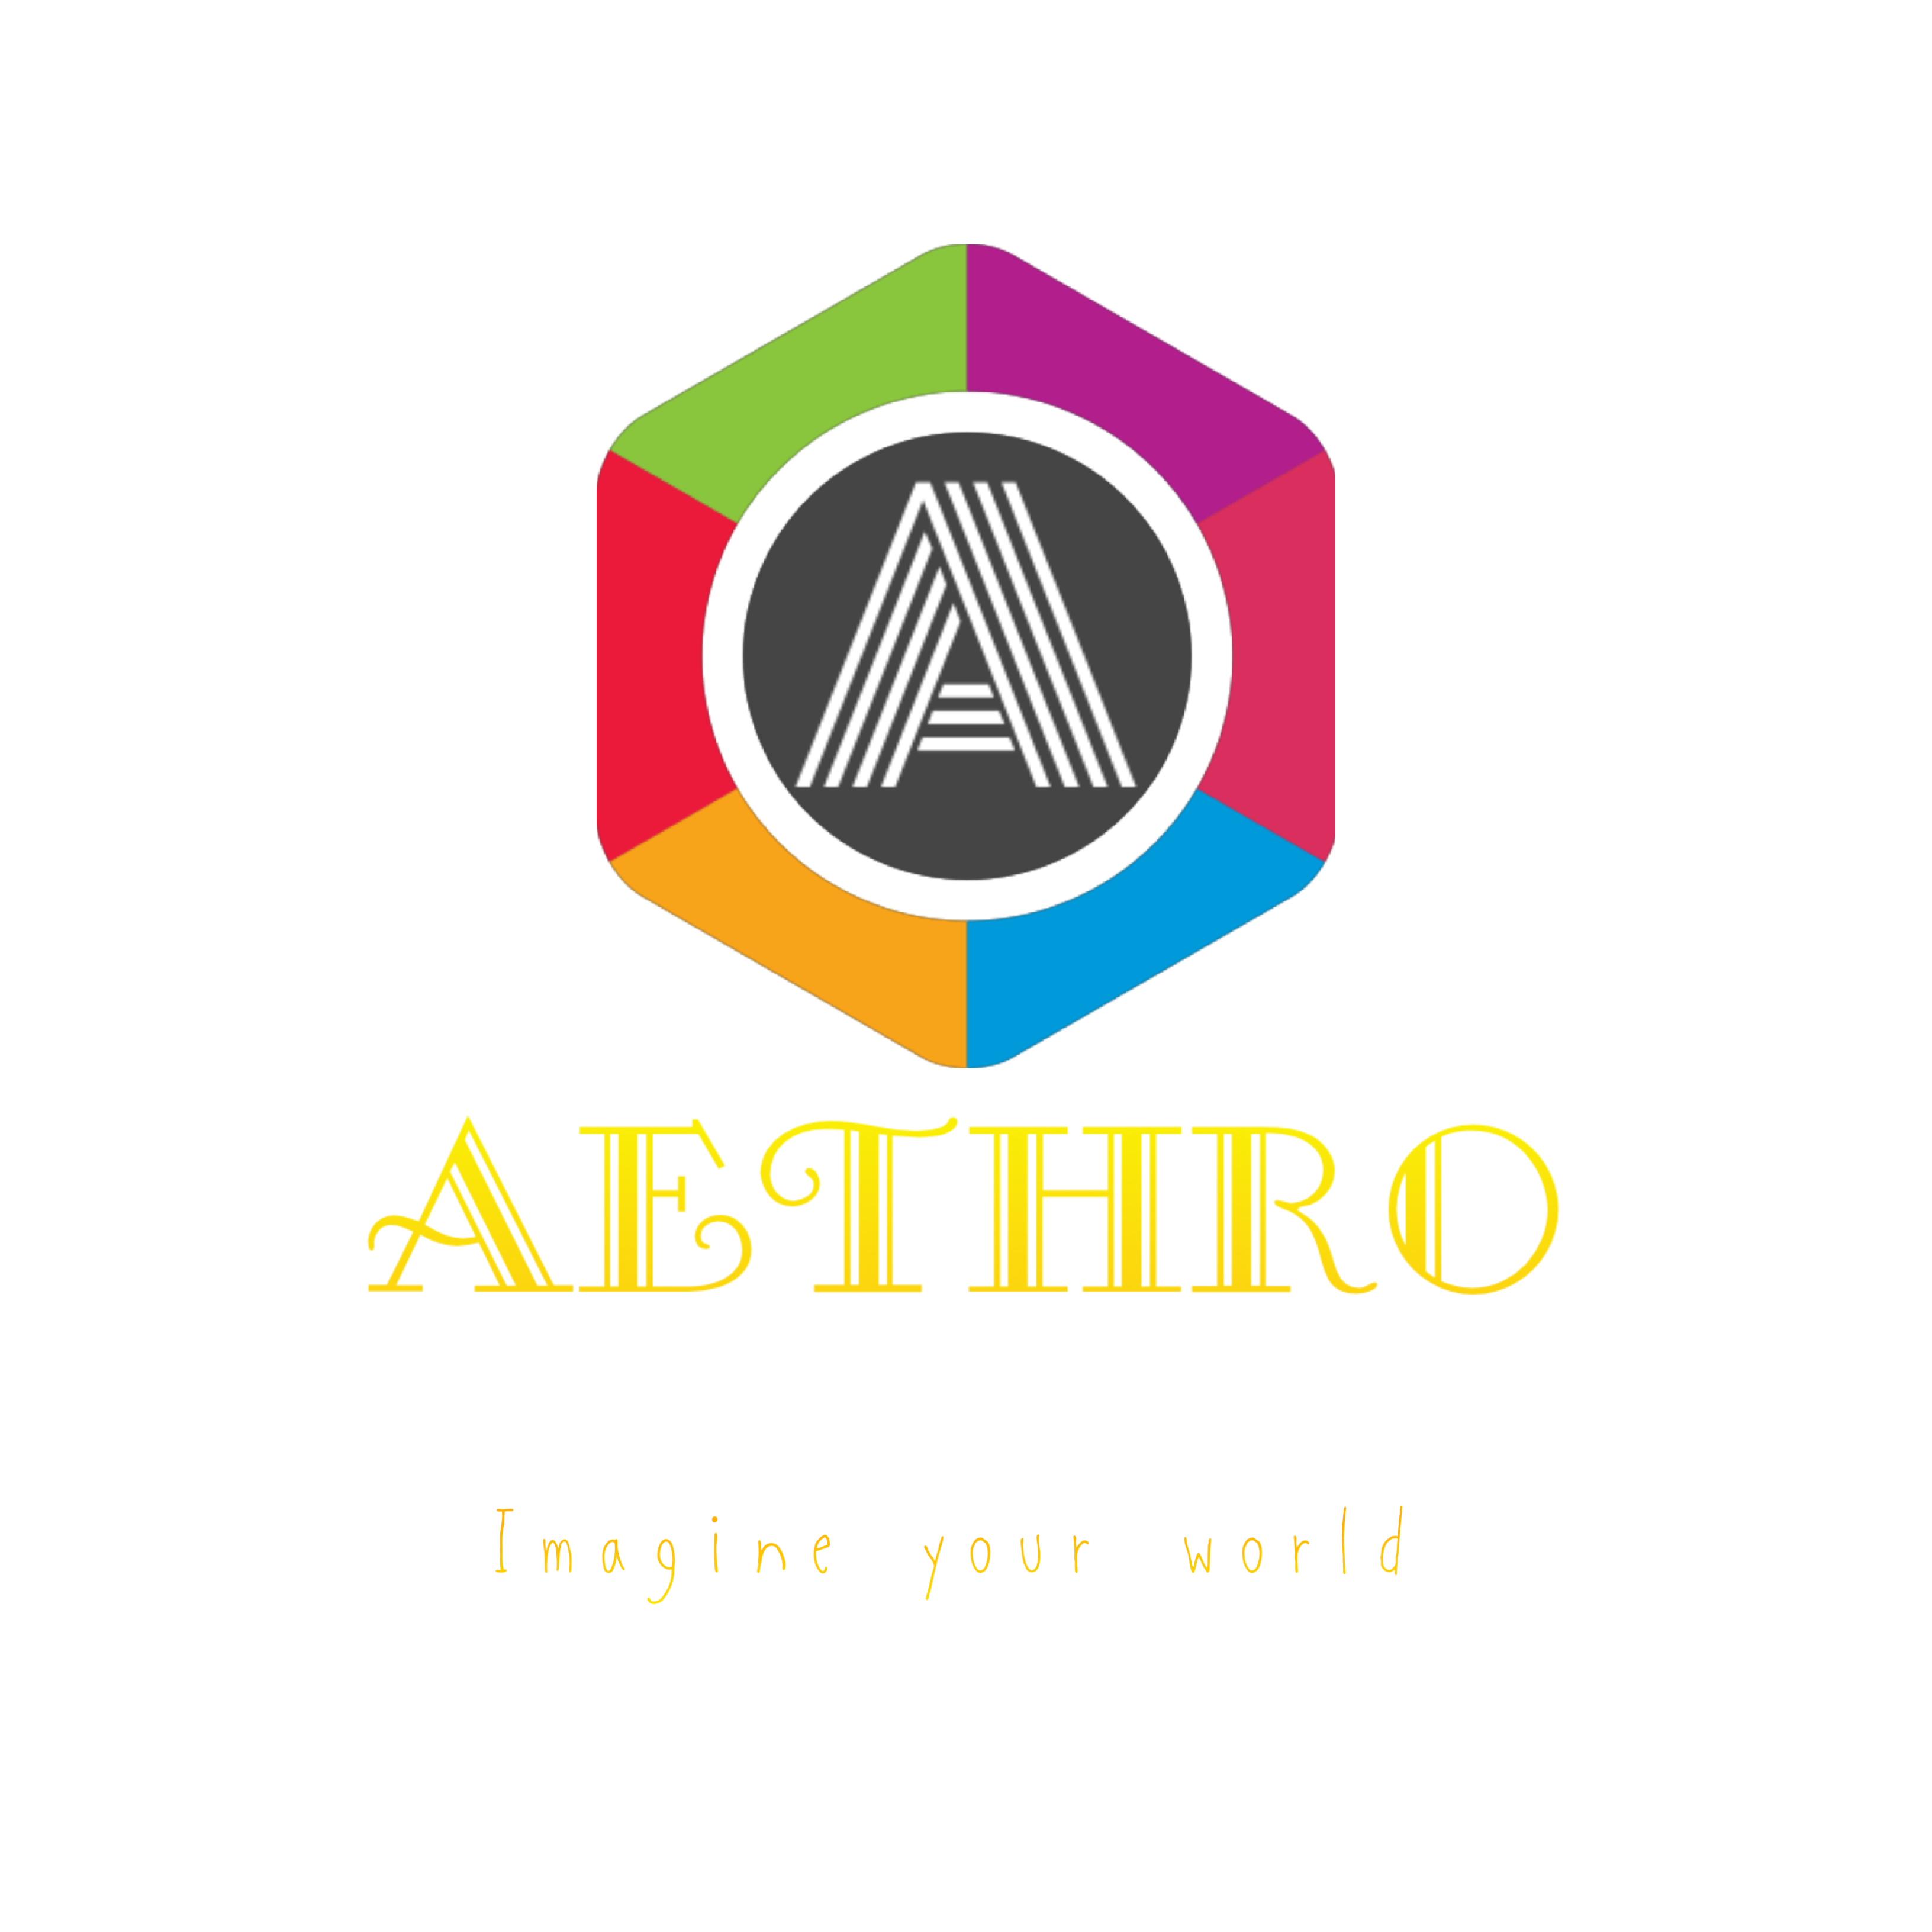 More information about "Welcome to Aethro's new site"